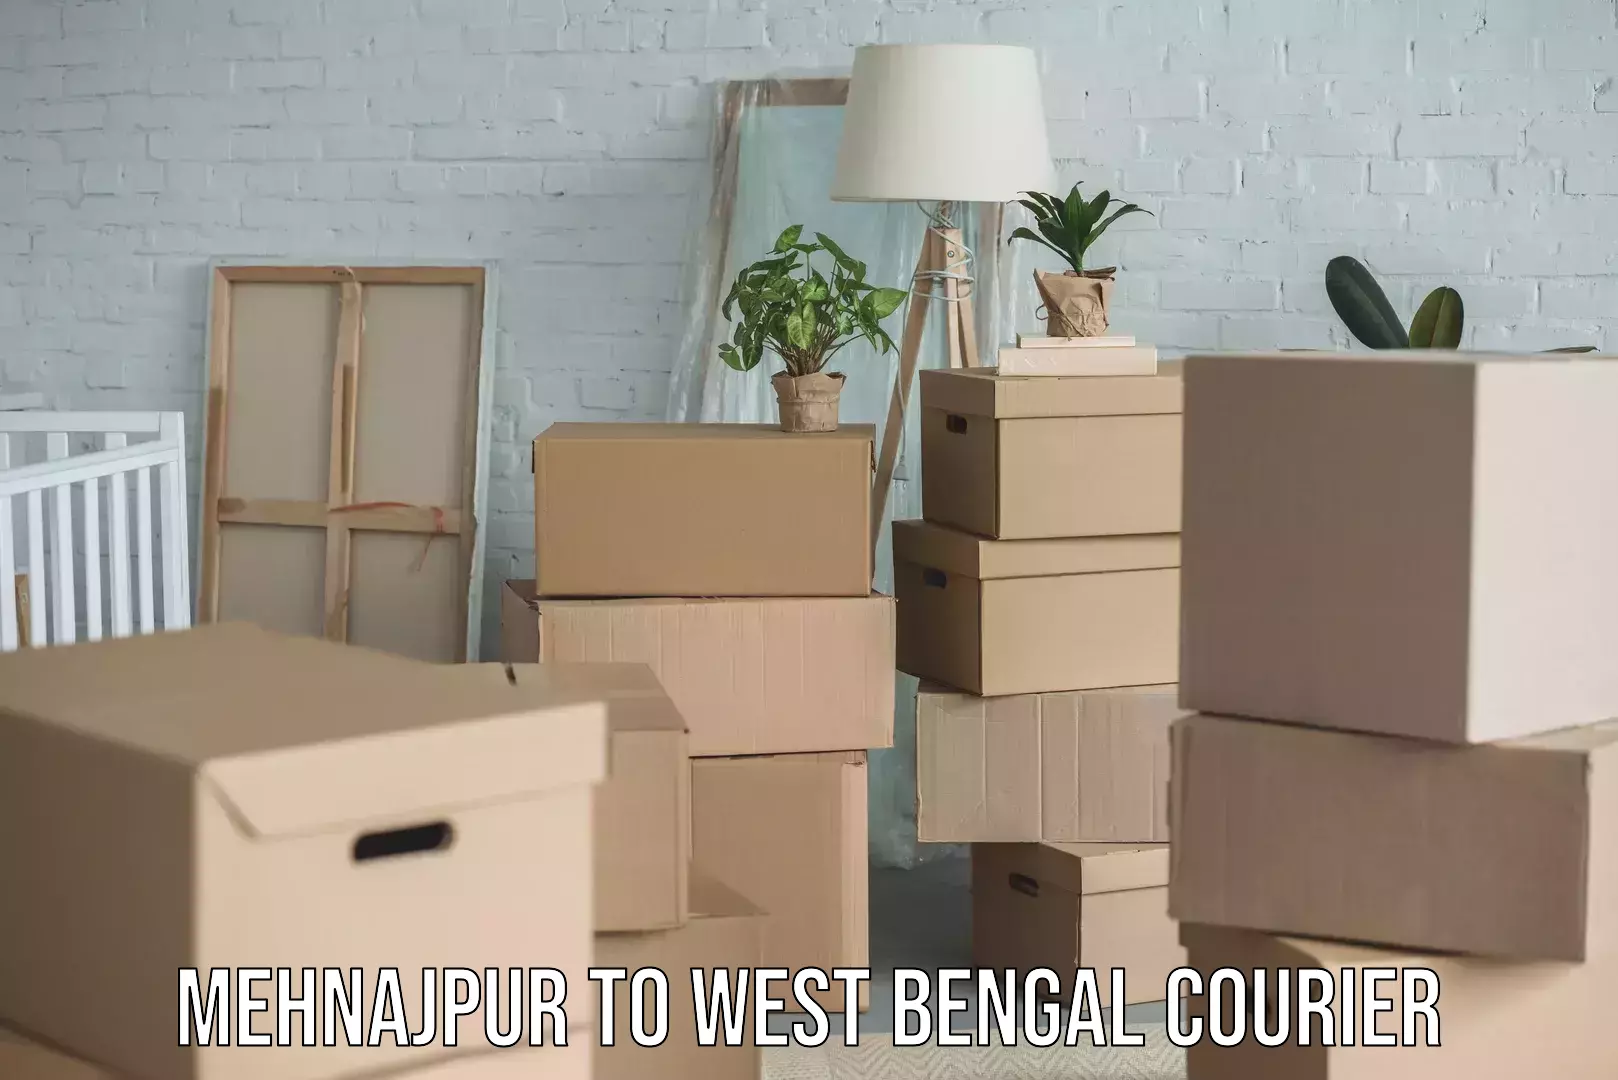 Professional moving company Mehnajpur to West Bengal